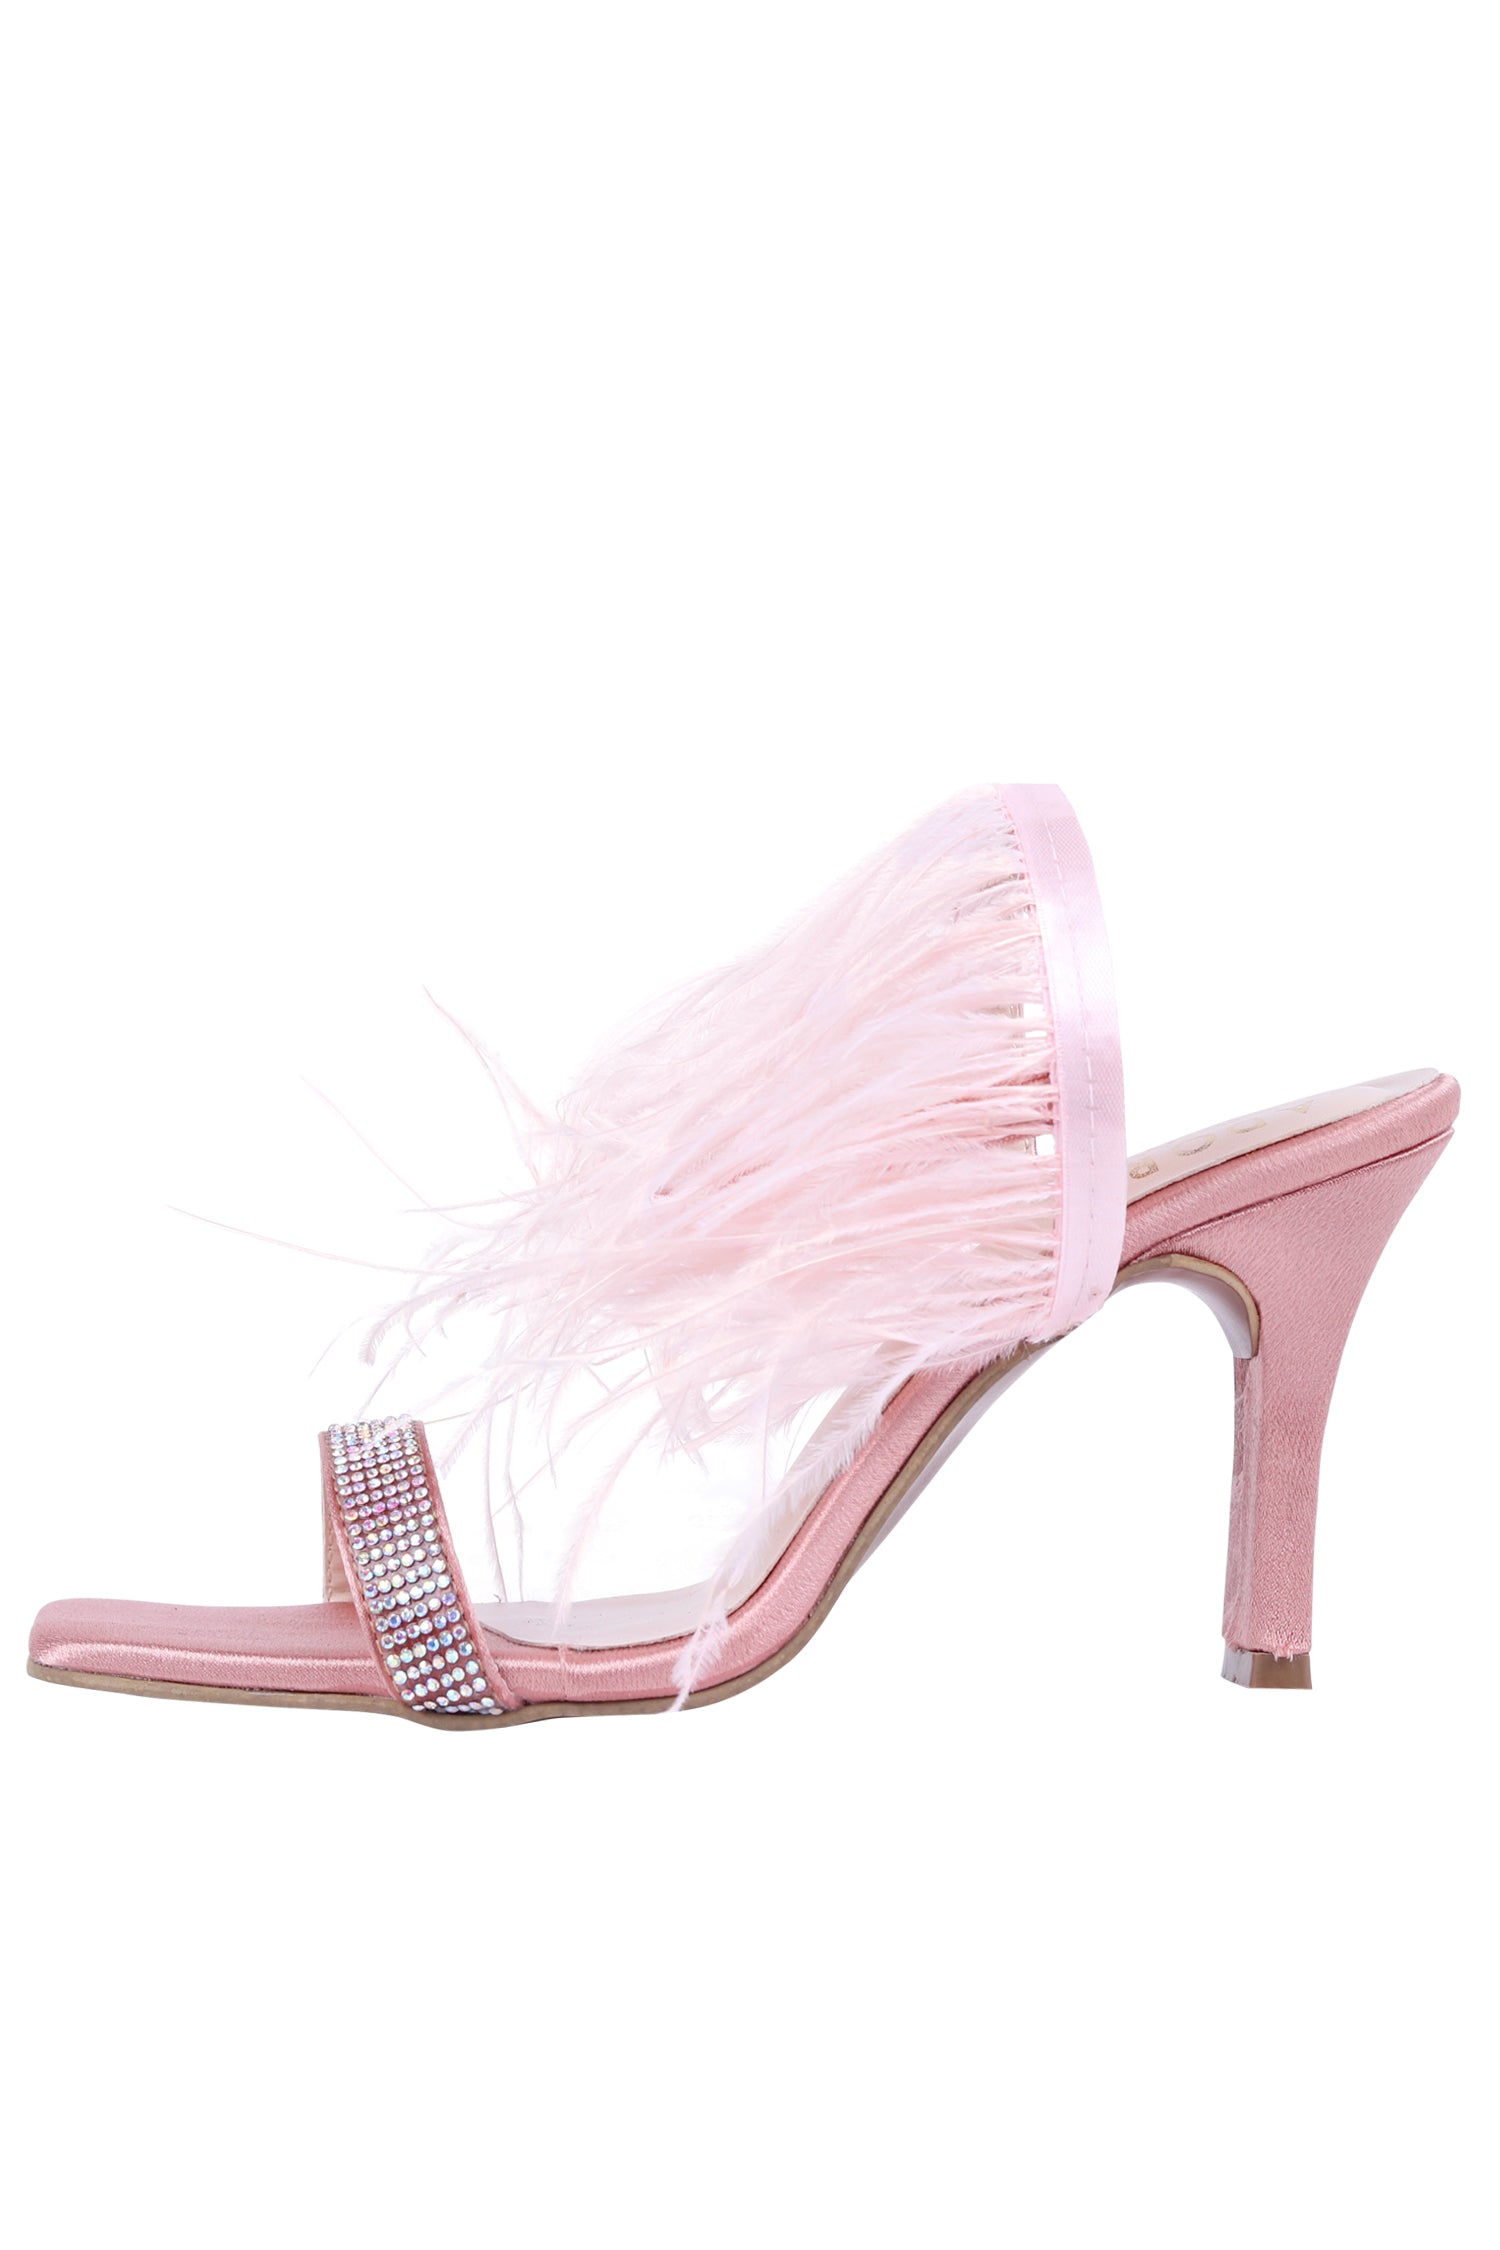 Prada Feathertrimmed Satin Sandals in Pink  Lyst